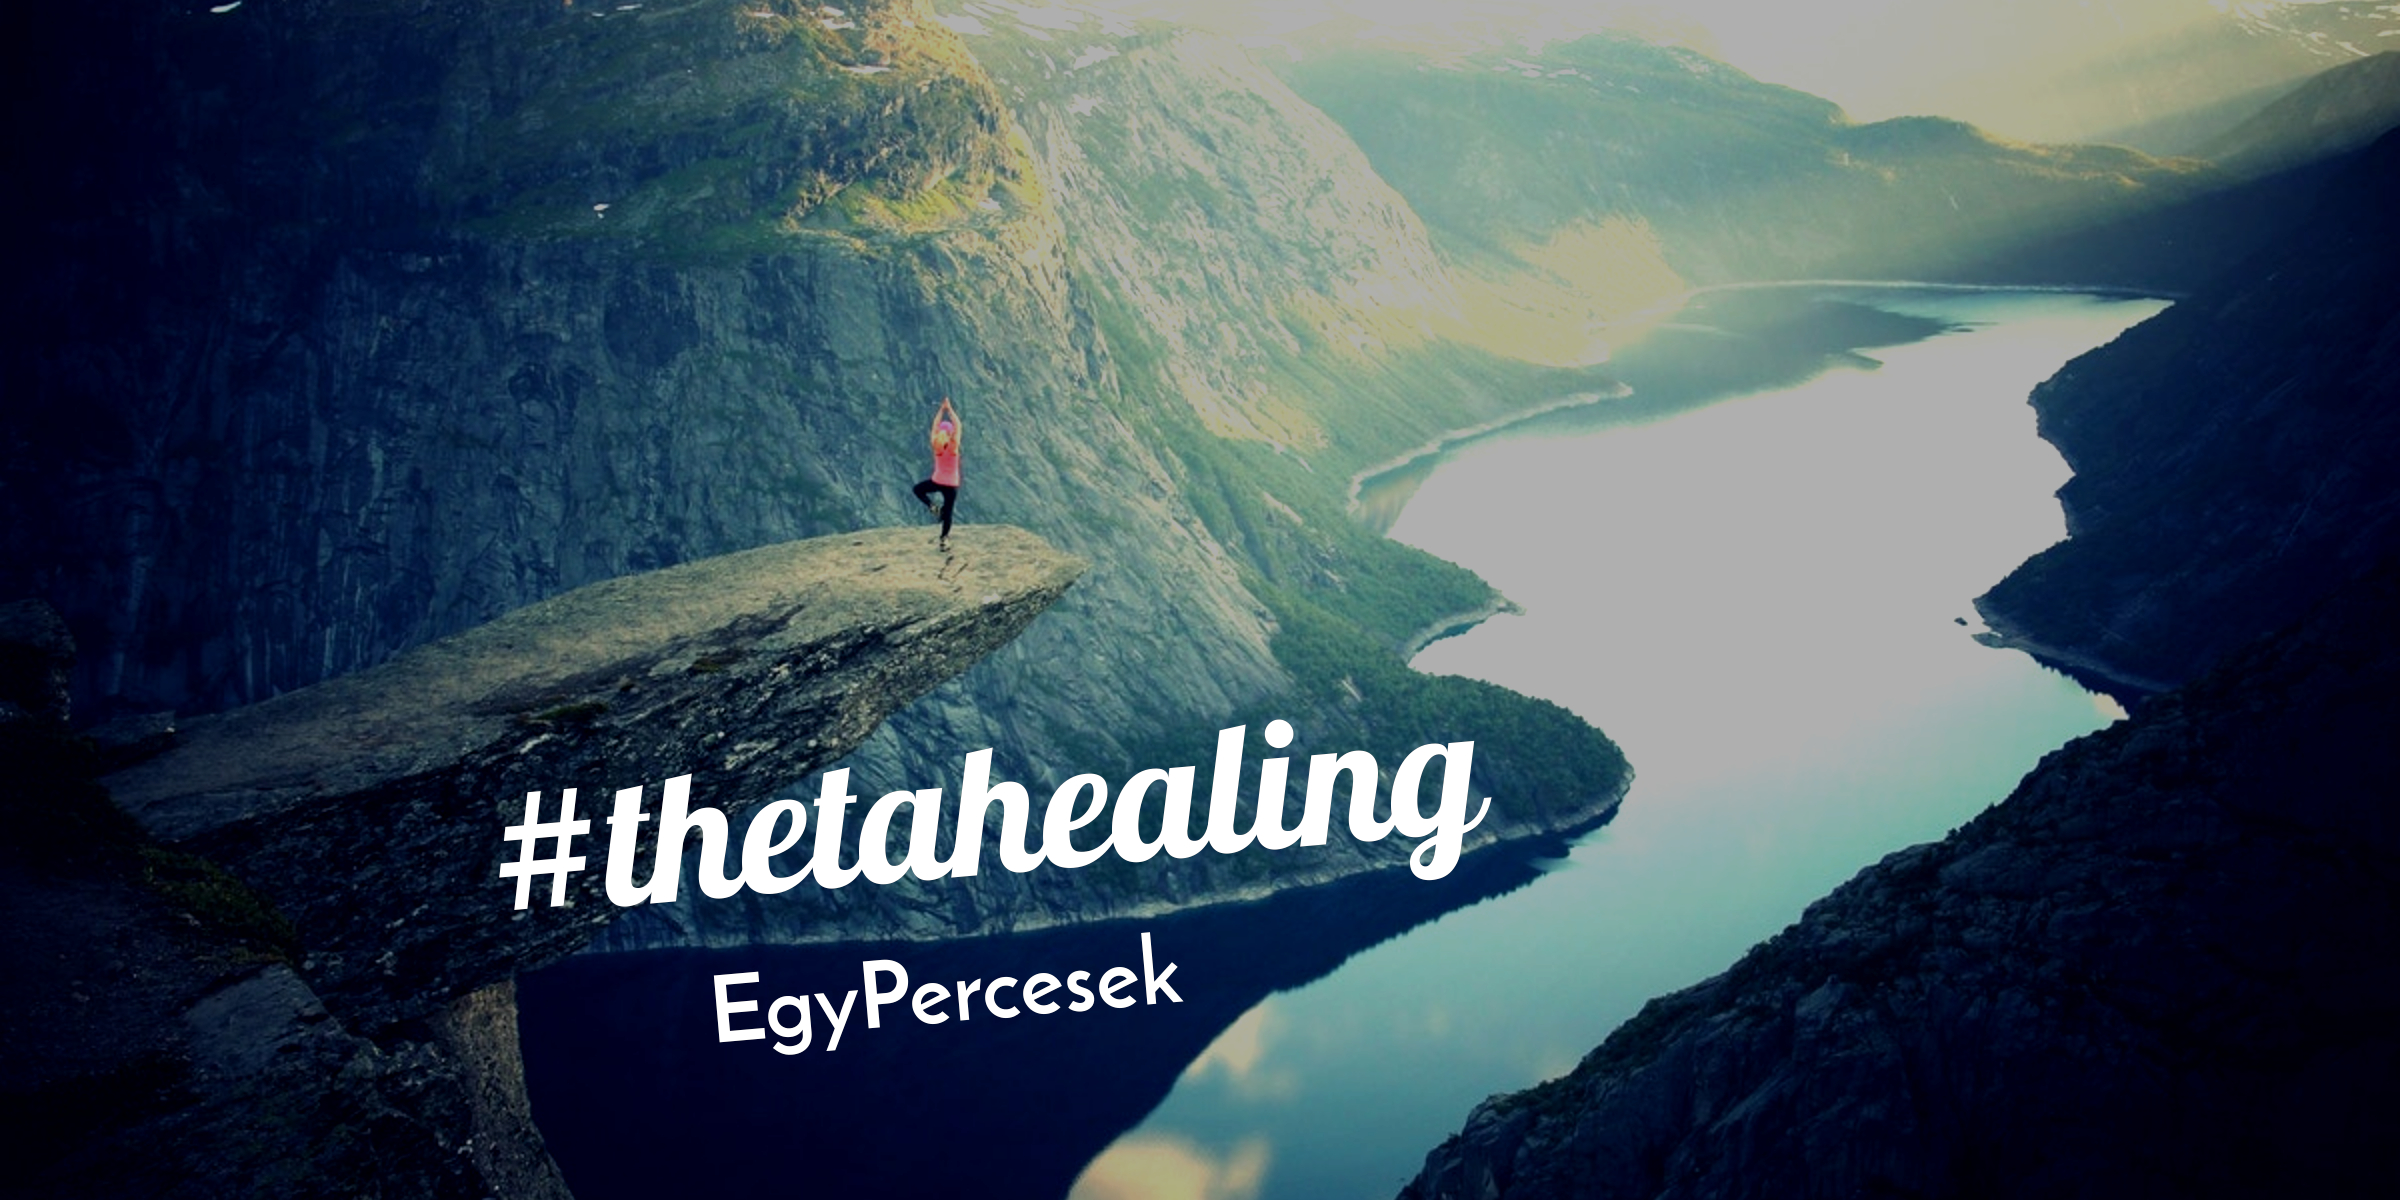 You are currently viewing Thetahealing EgyPercesek